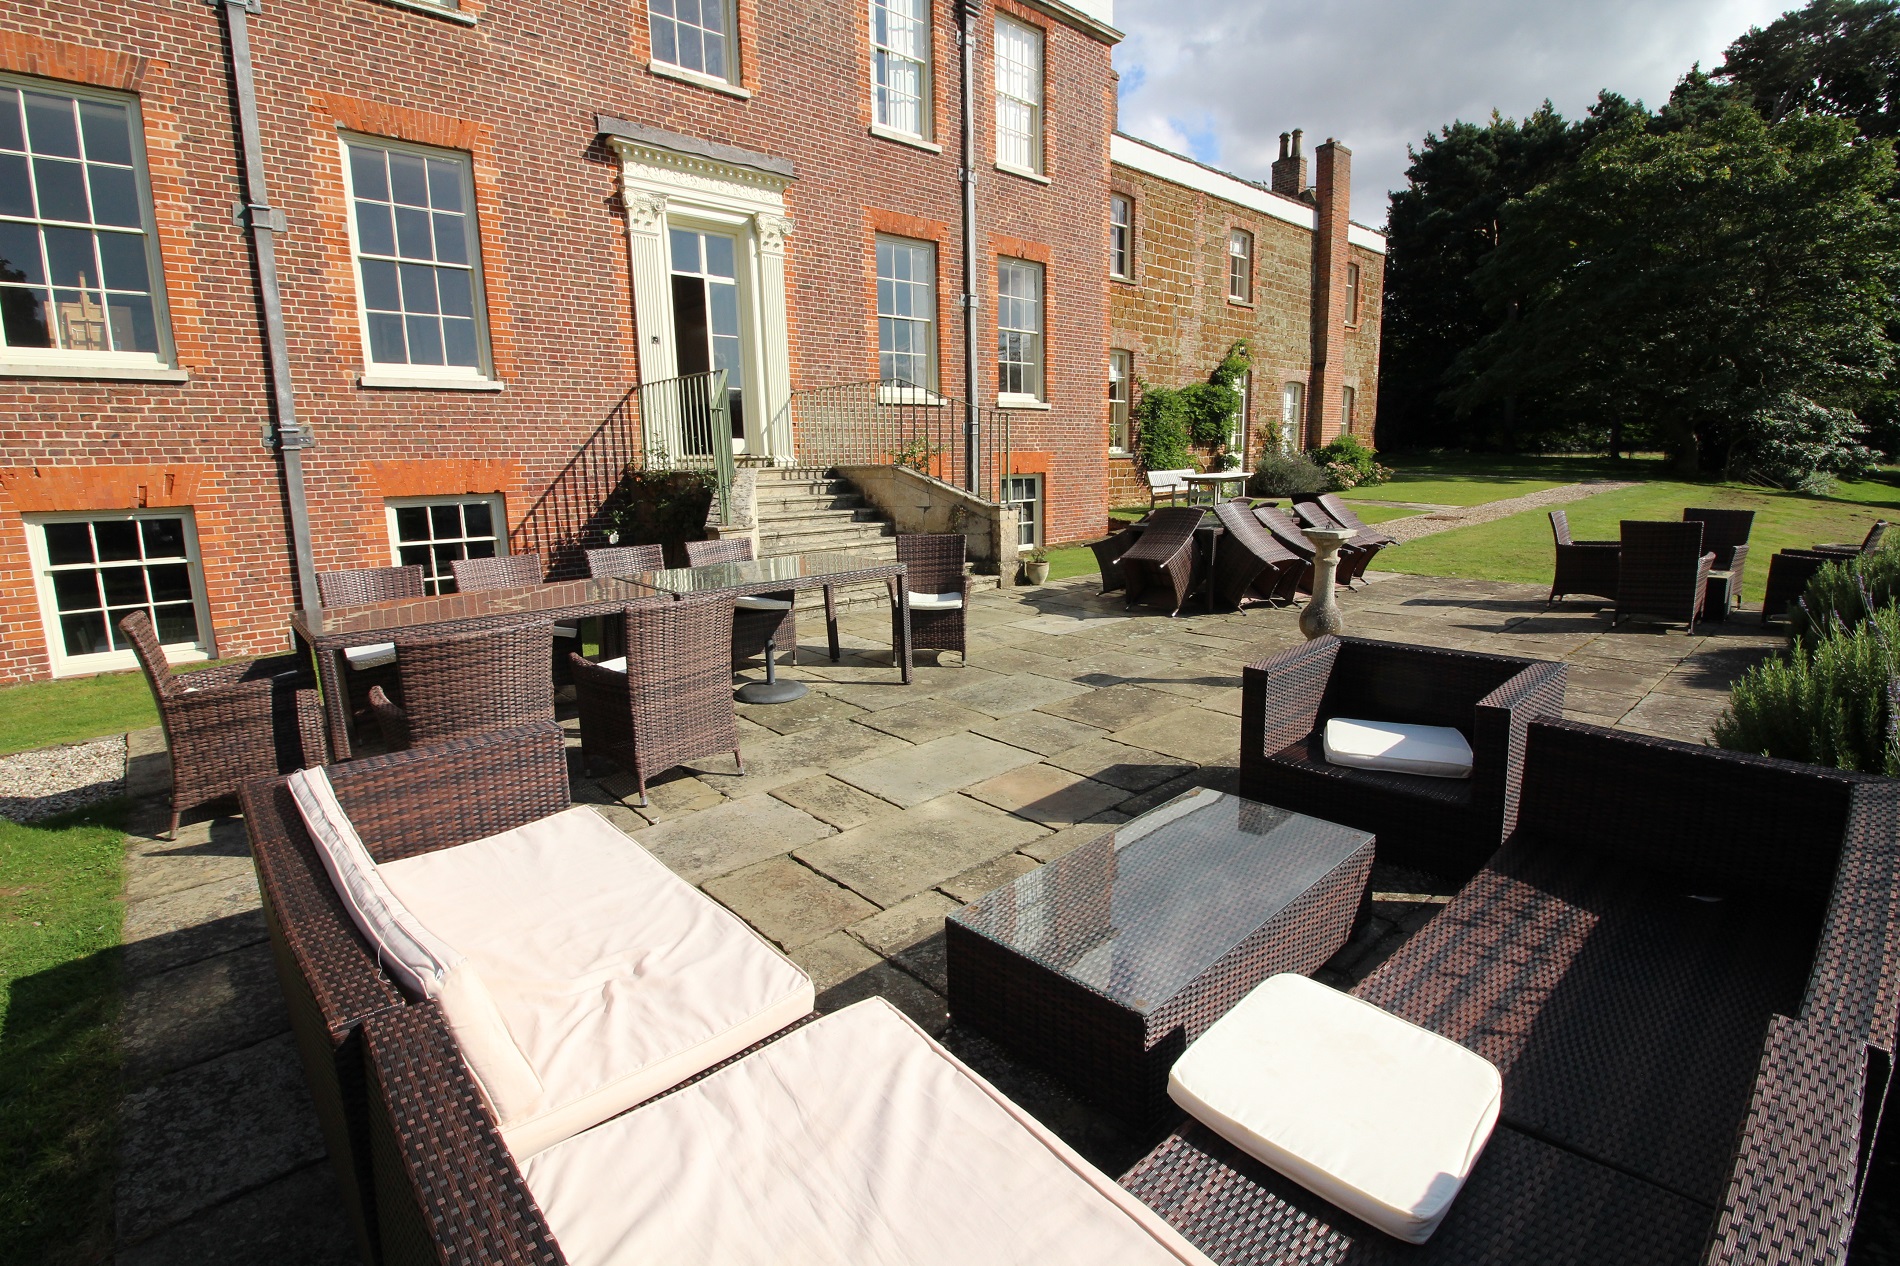 a patio area with chairs and tables outside of a brick building